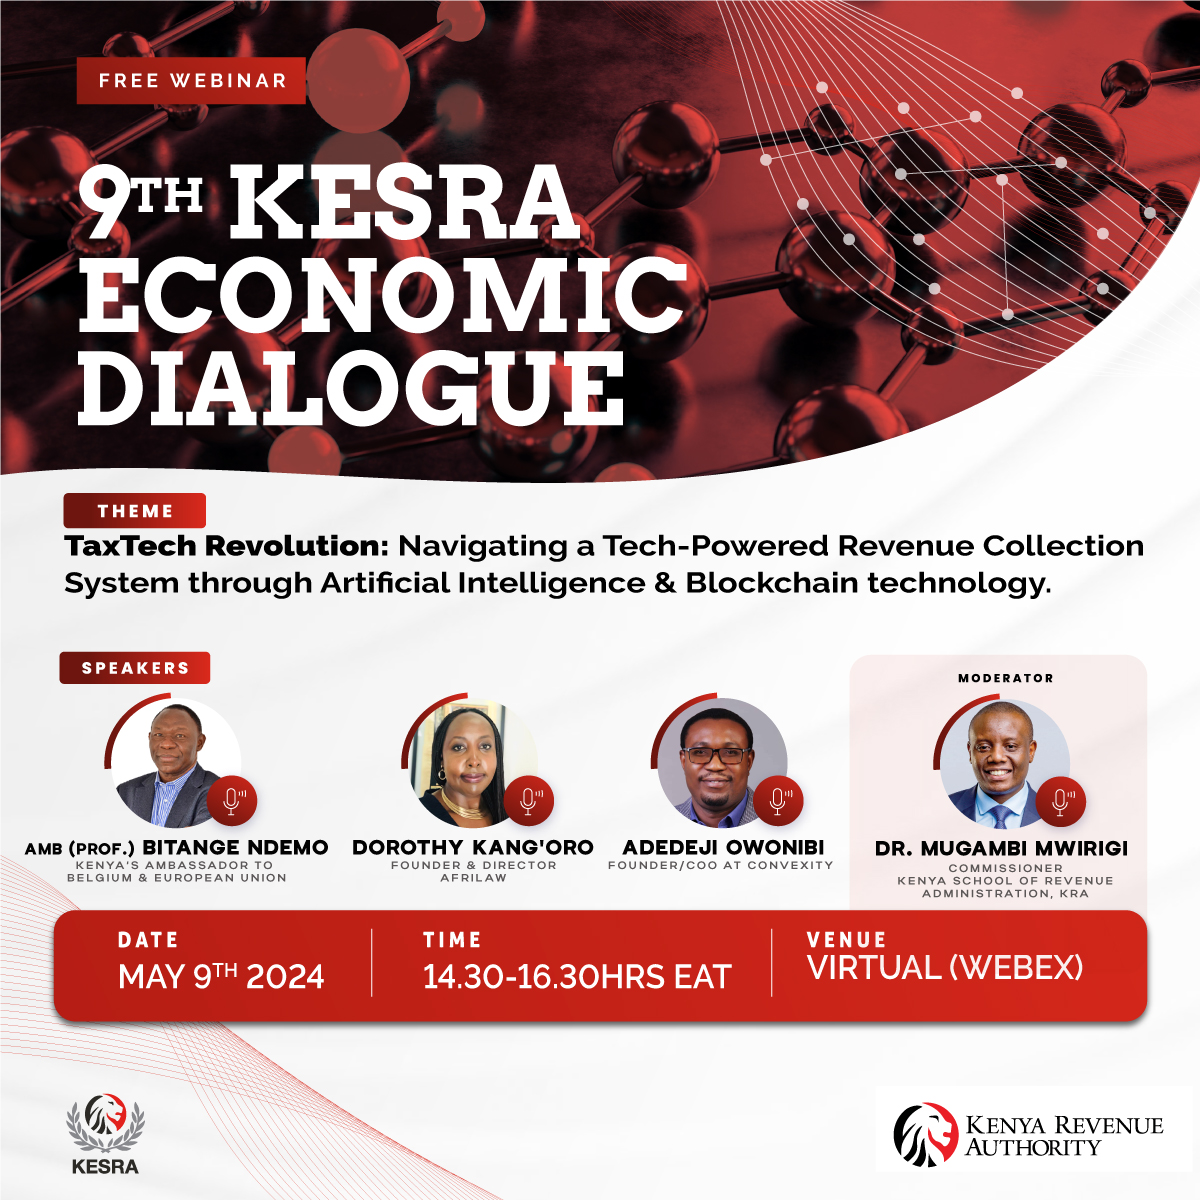 Join us for the 9th KESRA Economic Dialogue on TaxTech Revolution: Navigating a Tech-Powered Revenue Collection System through AI & Blockchain technology! 🗓️ Date: May 9, 2024 🕒 Time: 1430H - 1630H (EAT) Don't miss out on insights from industry leaders! Register now:…